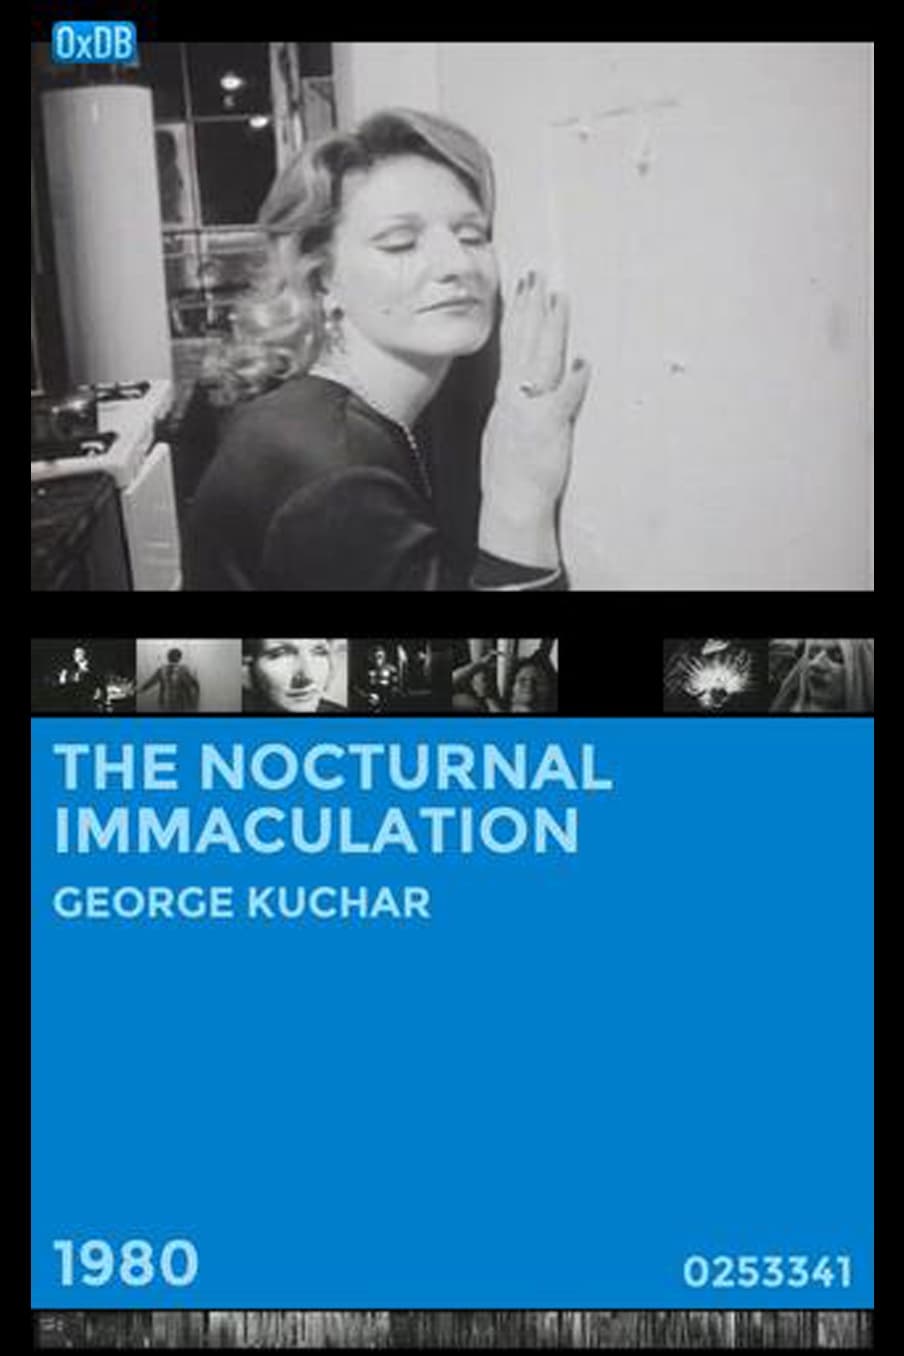 The Nocturnal Immaculation (1980)